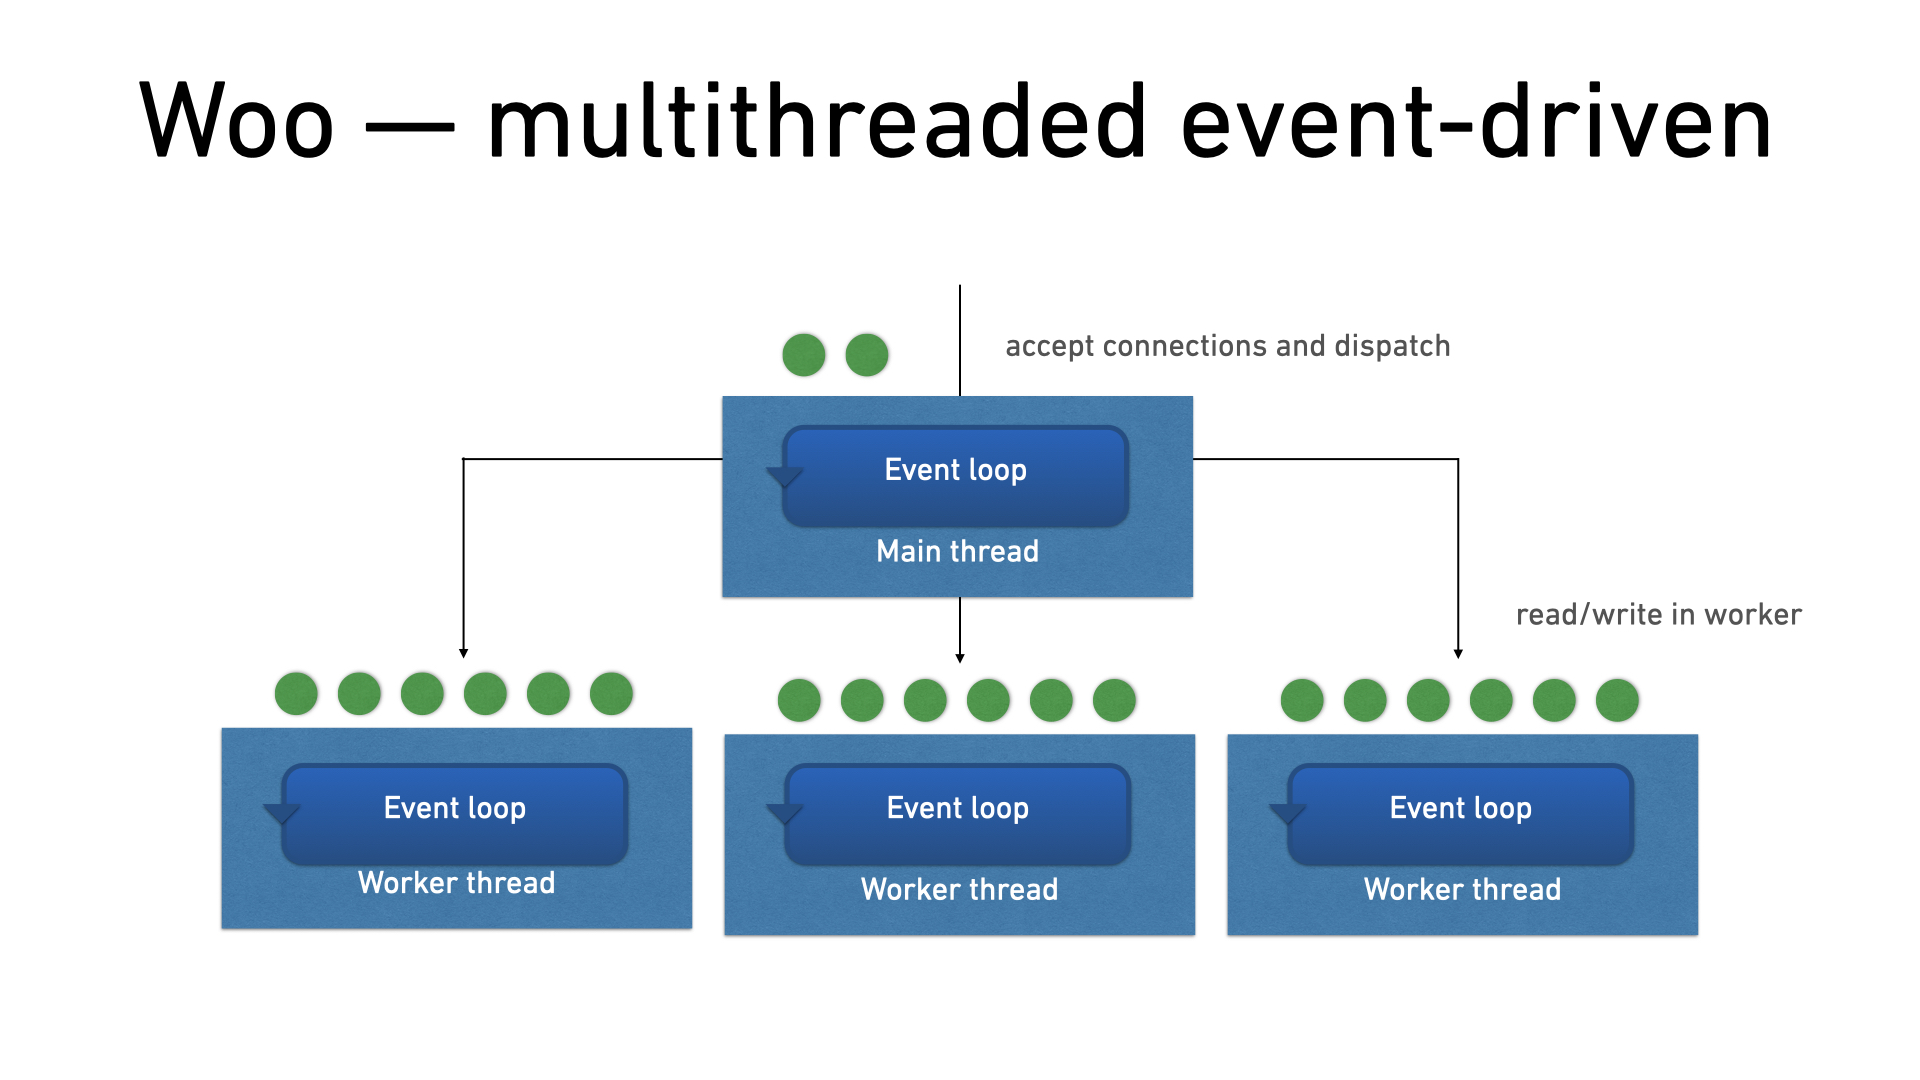 Woo multithreaded event-driven architecture